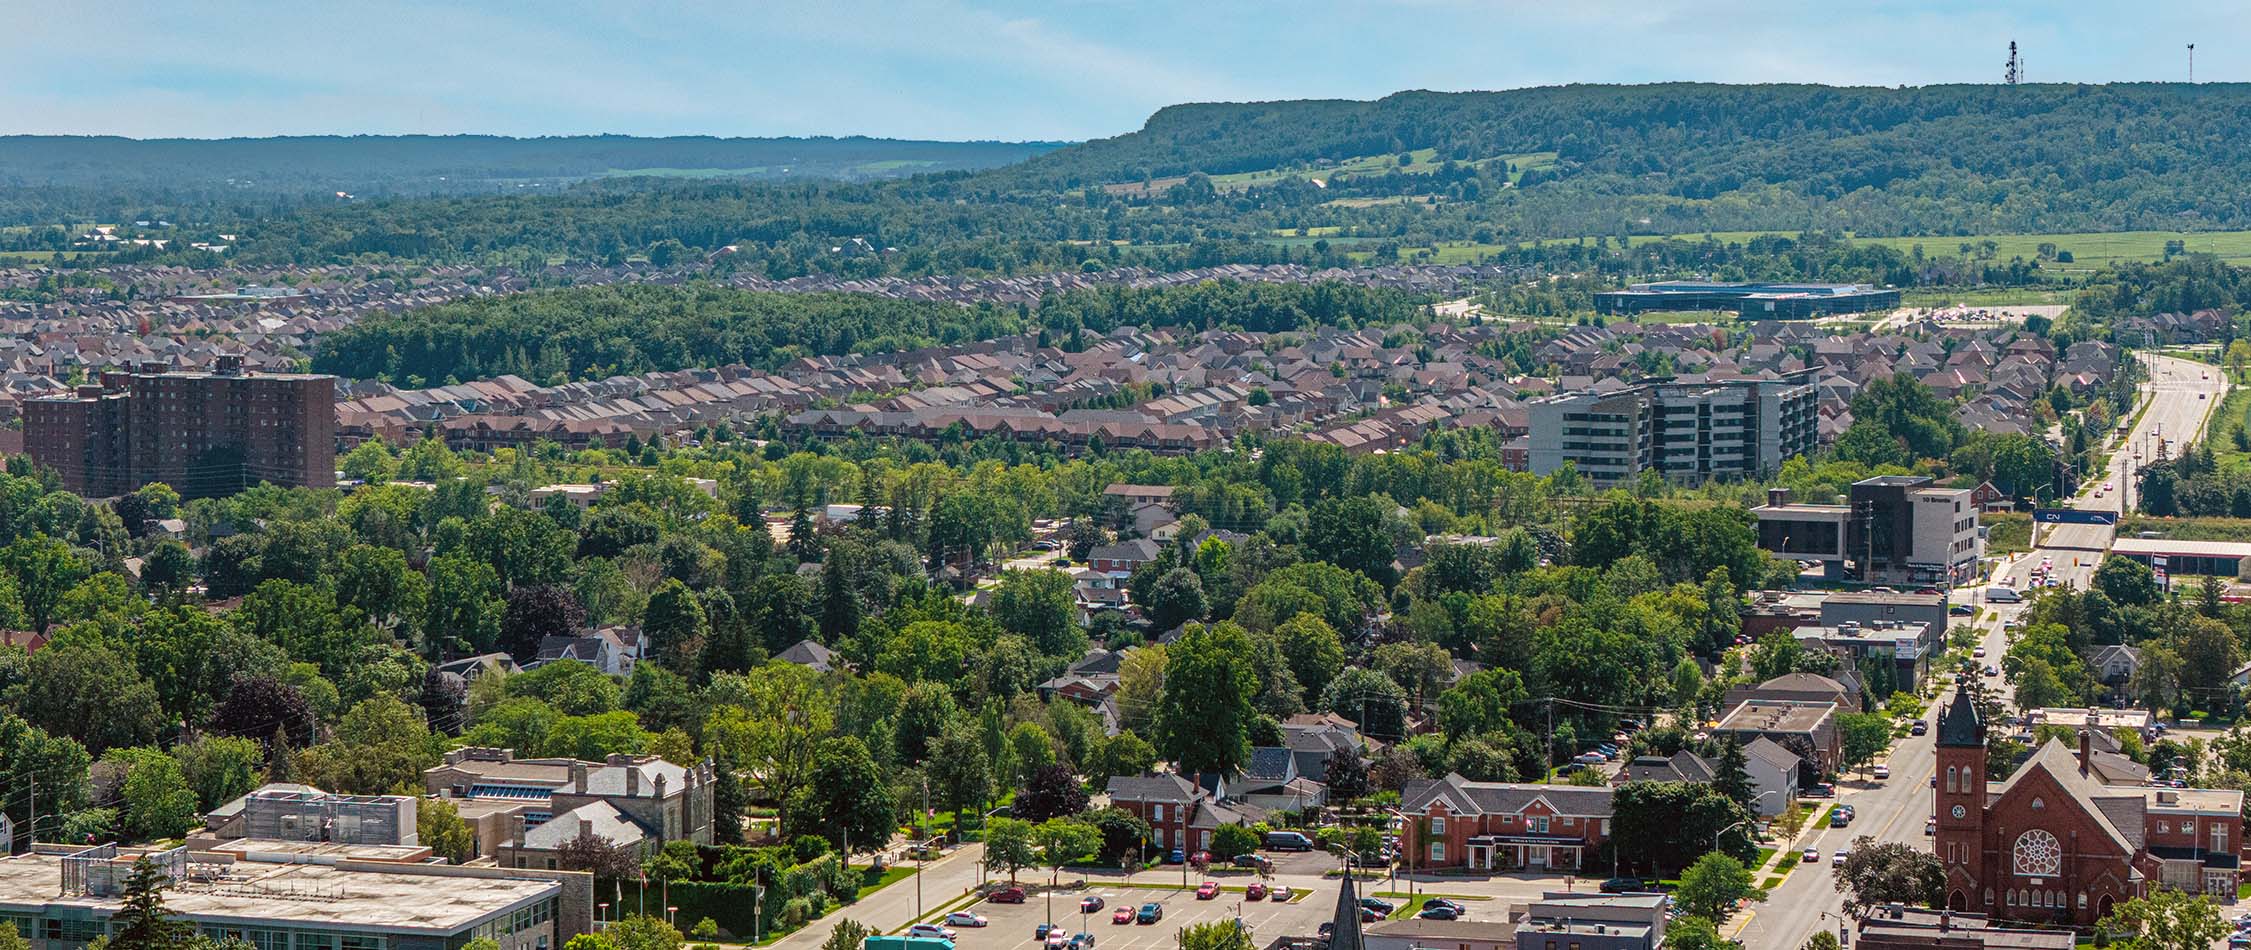 A residential community in Milton with the Niagara Escarpment in the background